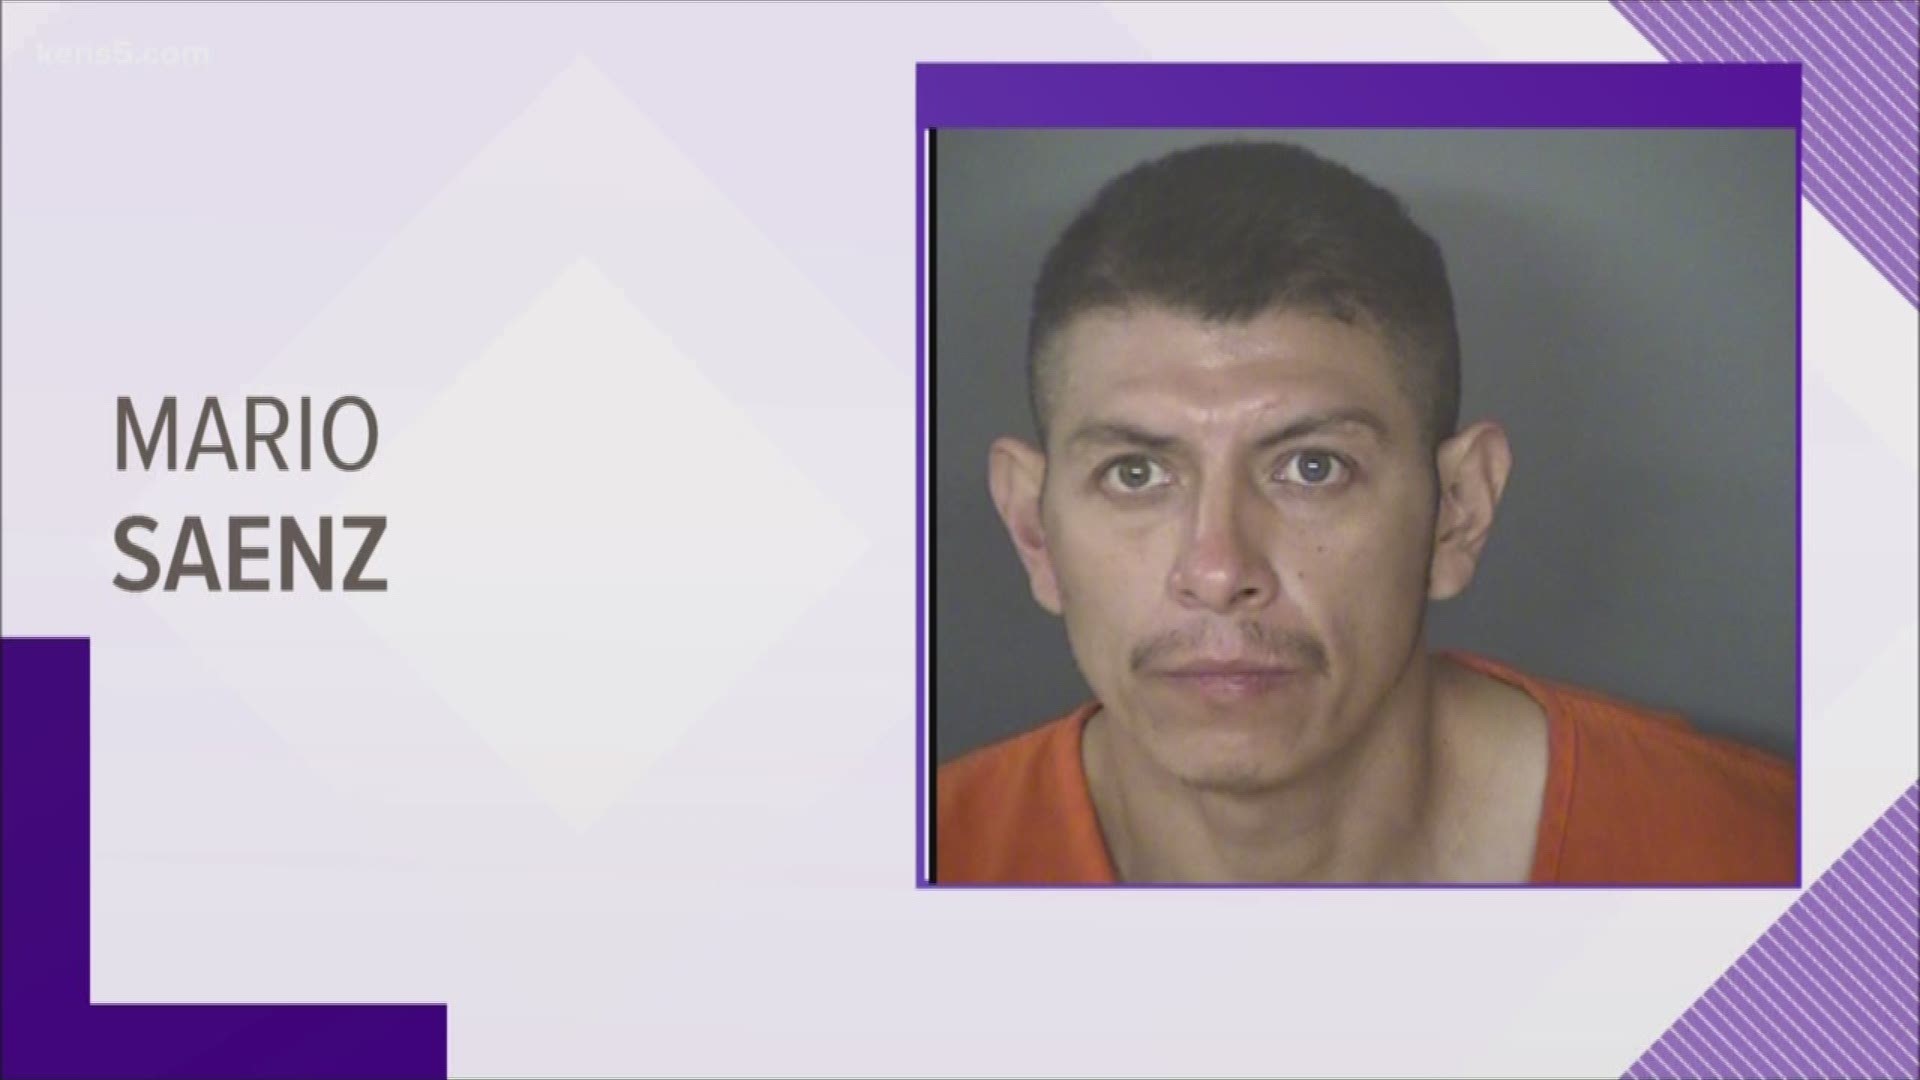 The incident took place around 2:30 a.m. Tuesday at the downtown hotel; authorities arrested Mario Saenz later in the day.